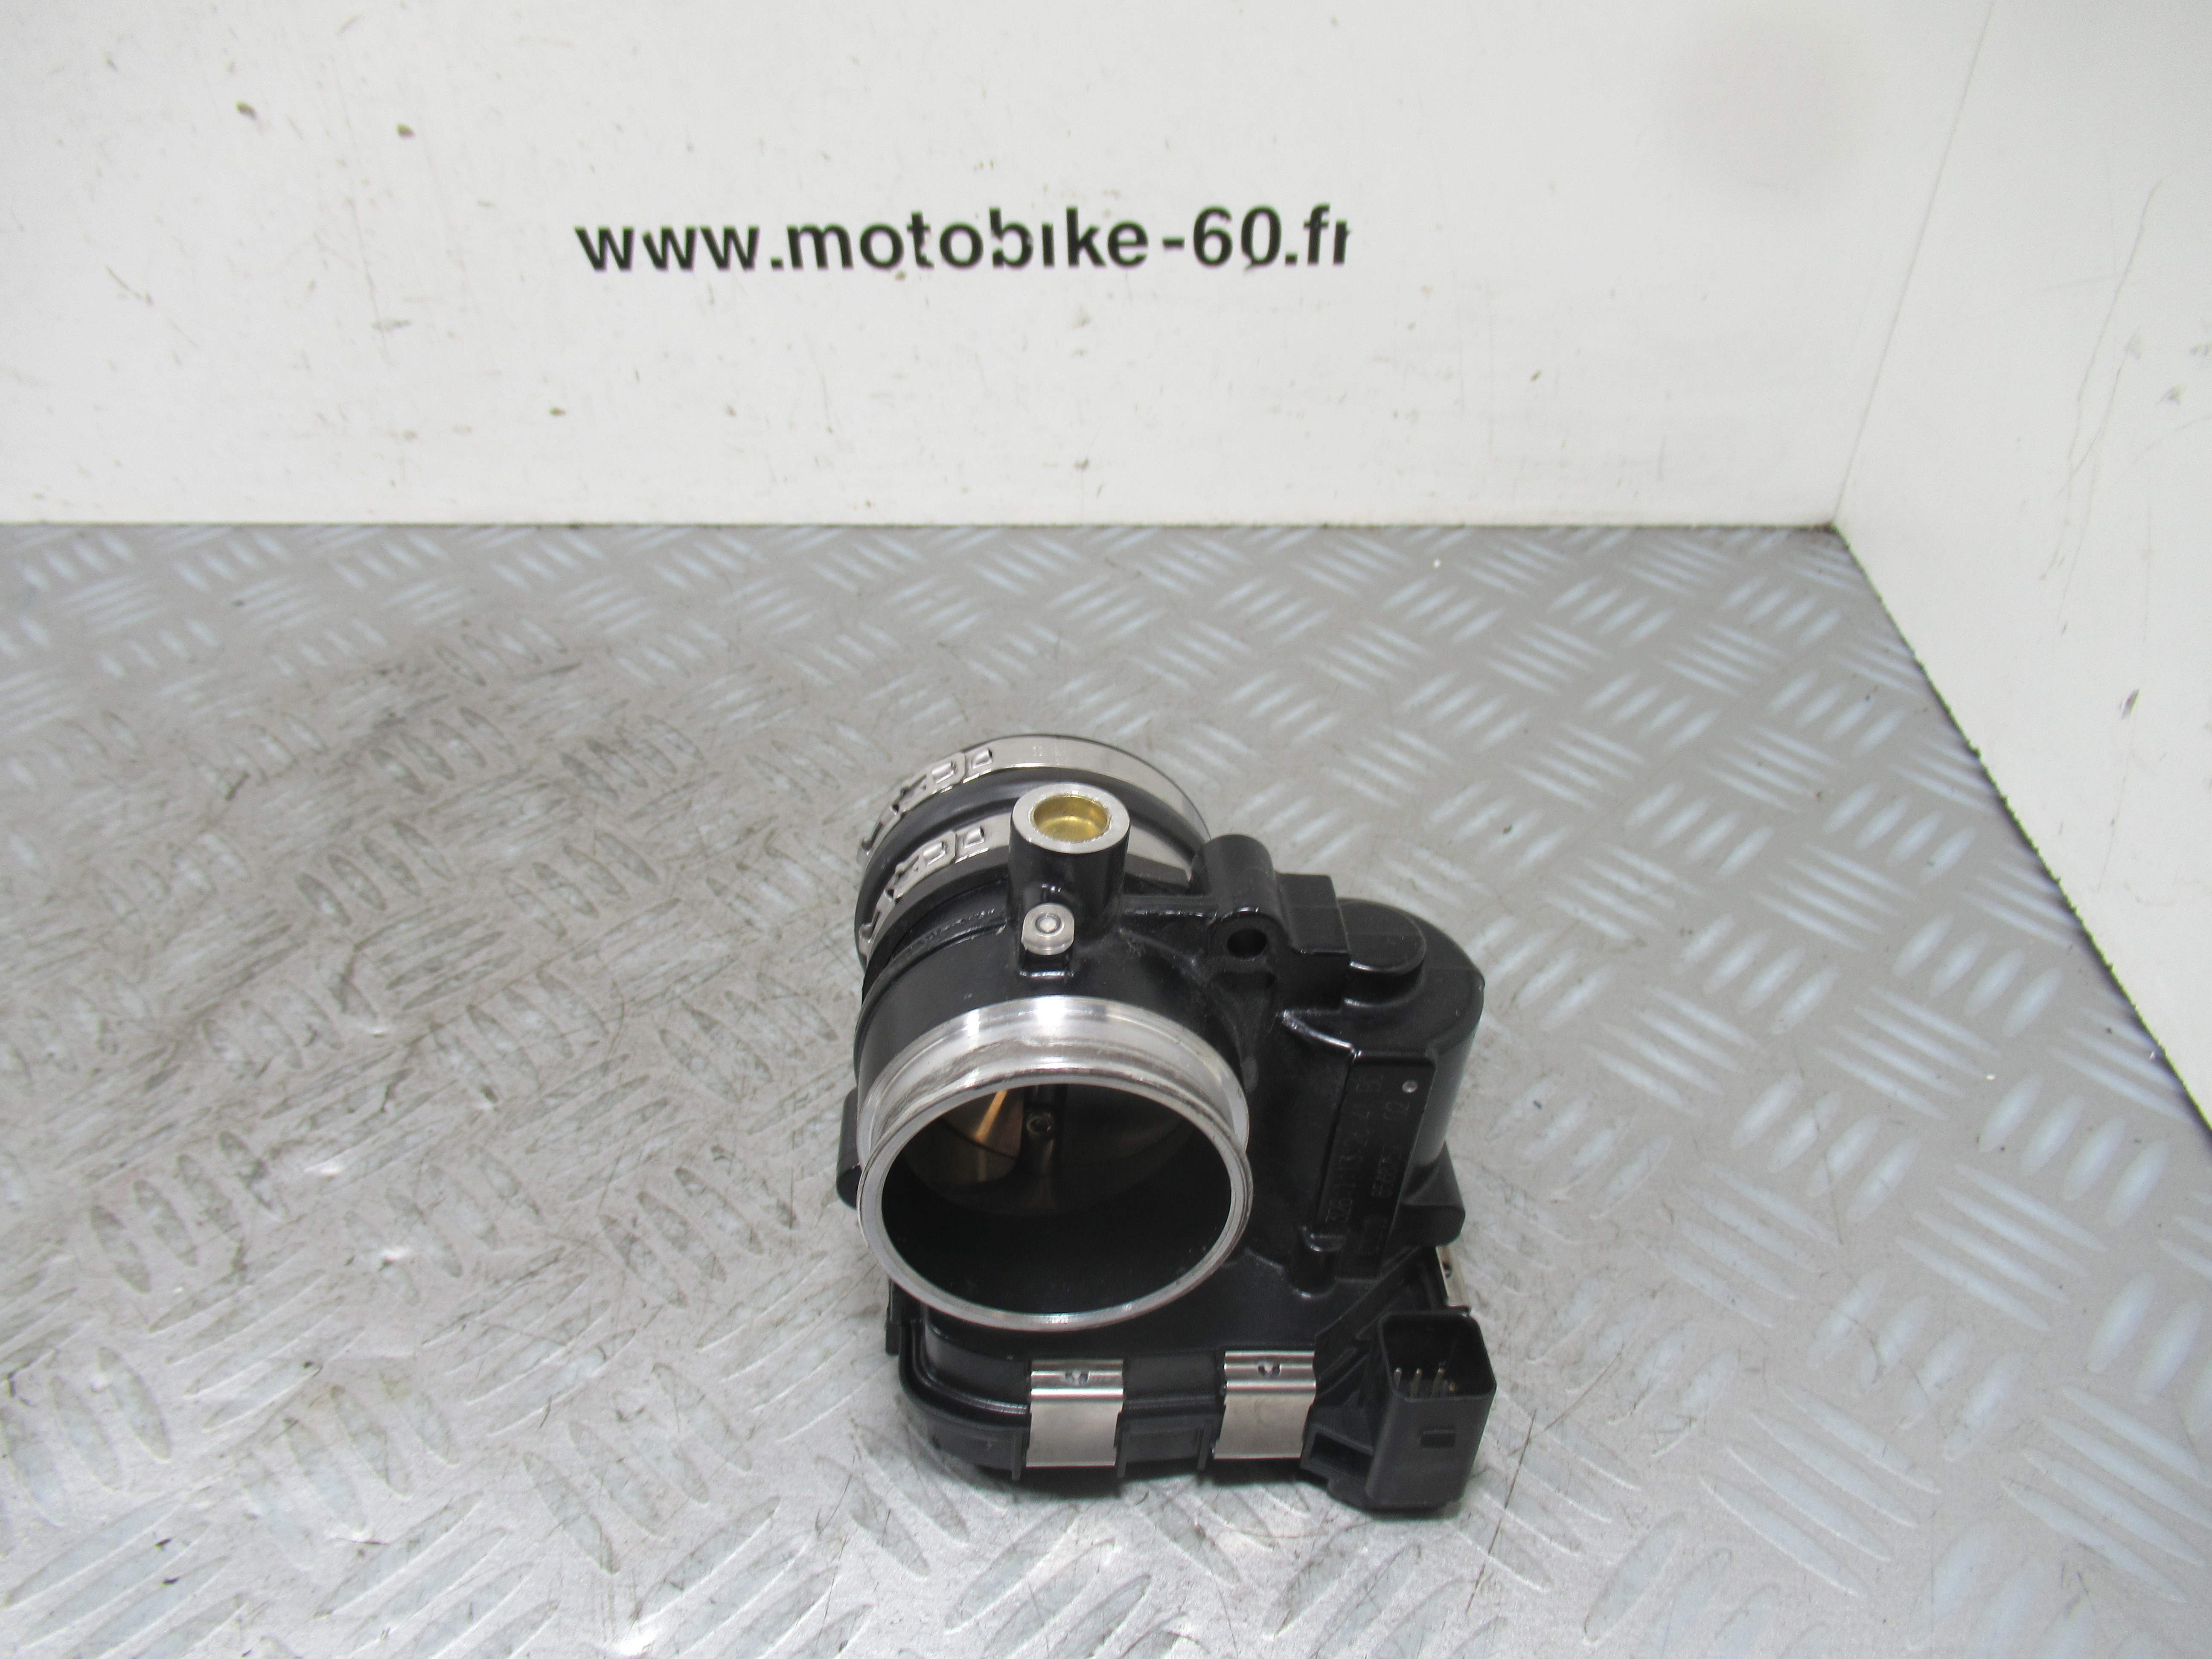 Corps injection BMW R 1250 GS Adventure 4t (8568757)